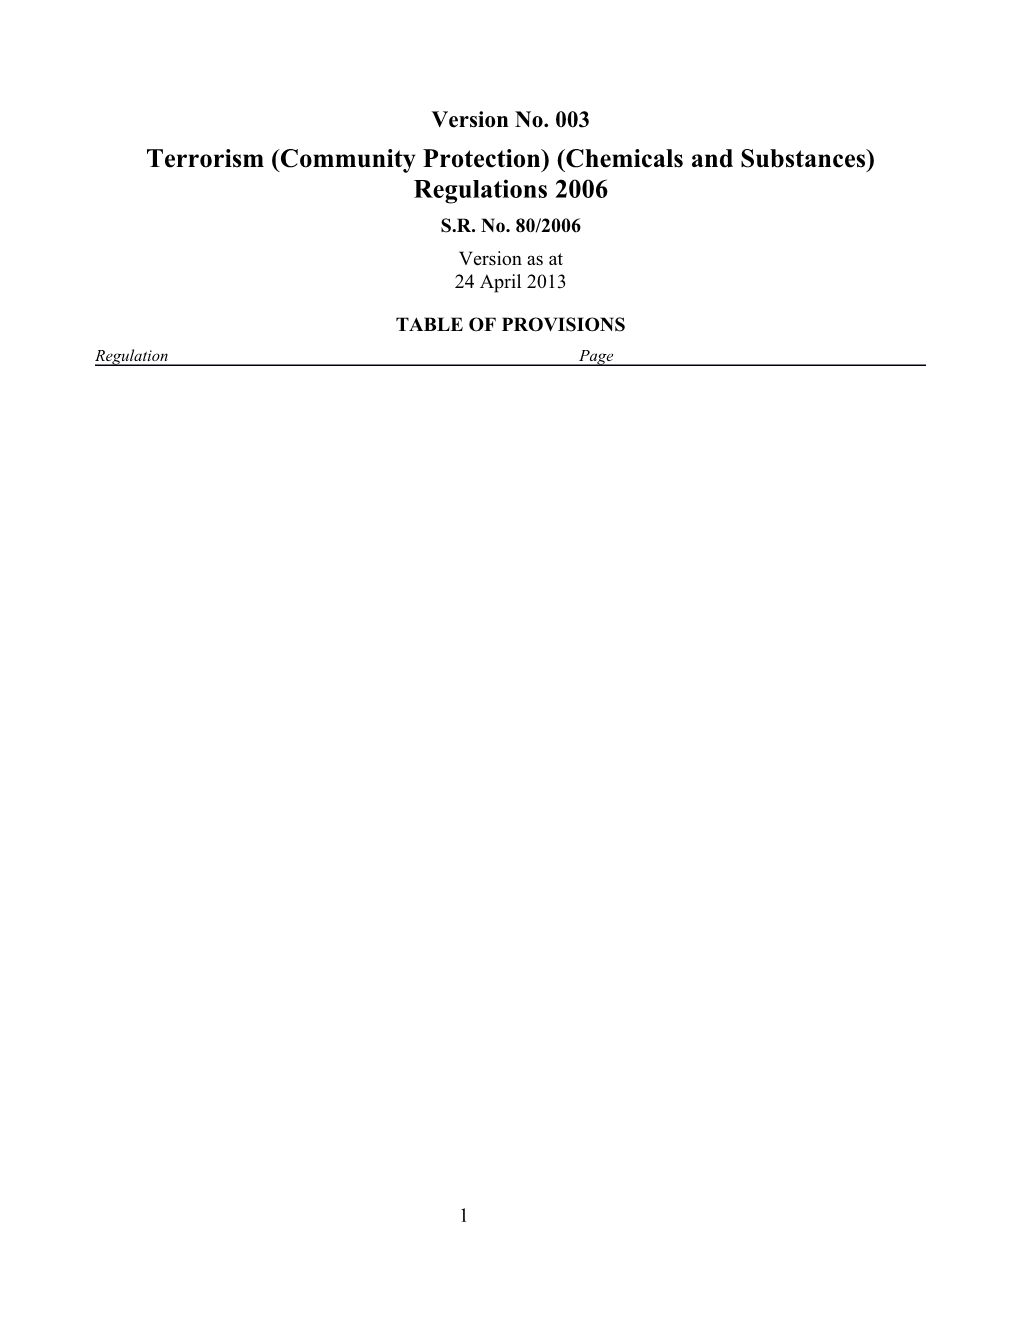 Terrorism (Community Protection) (Chemicals and Substances) Regulations 2006